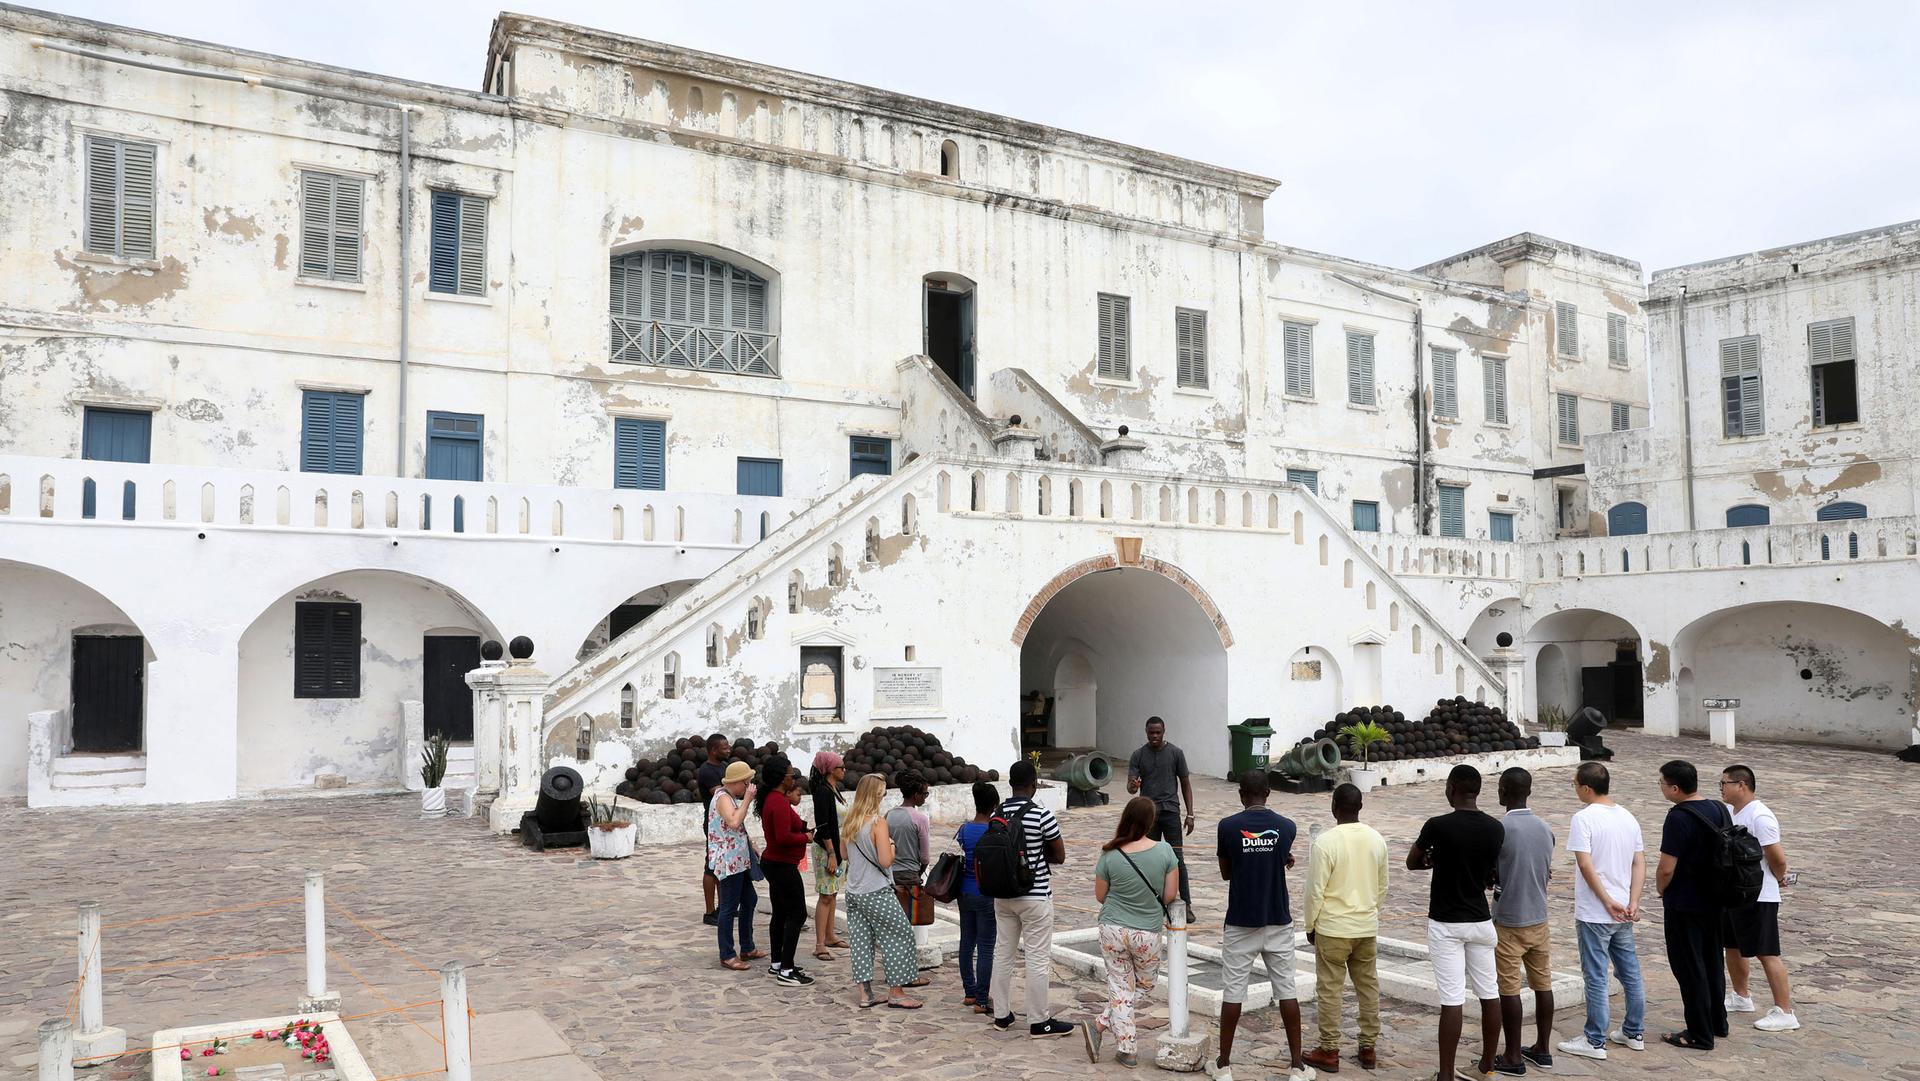 Several people are shown standing around a tour guide in front of the white facade of the Cape Coast Castle.